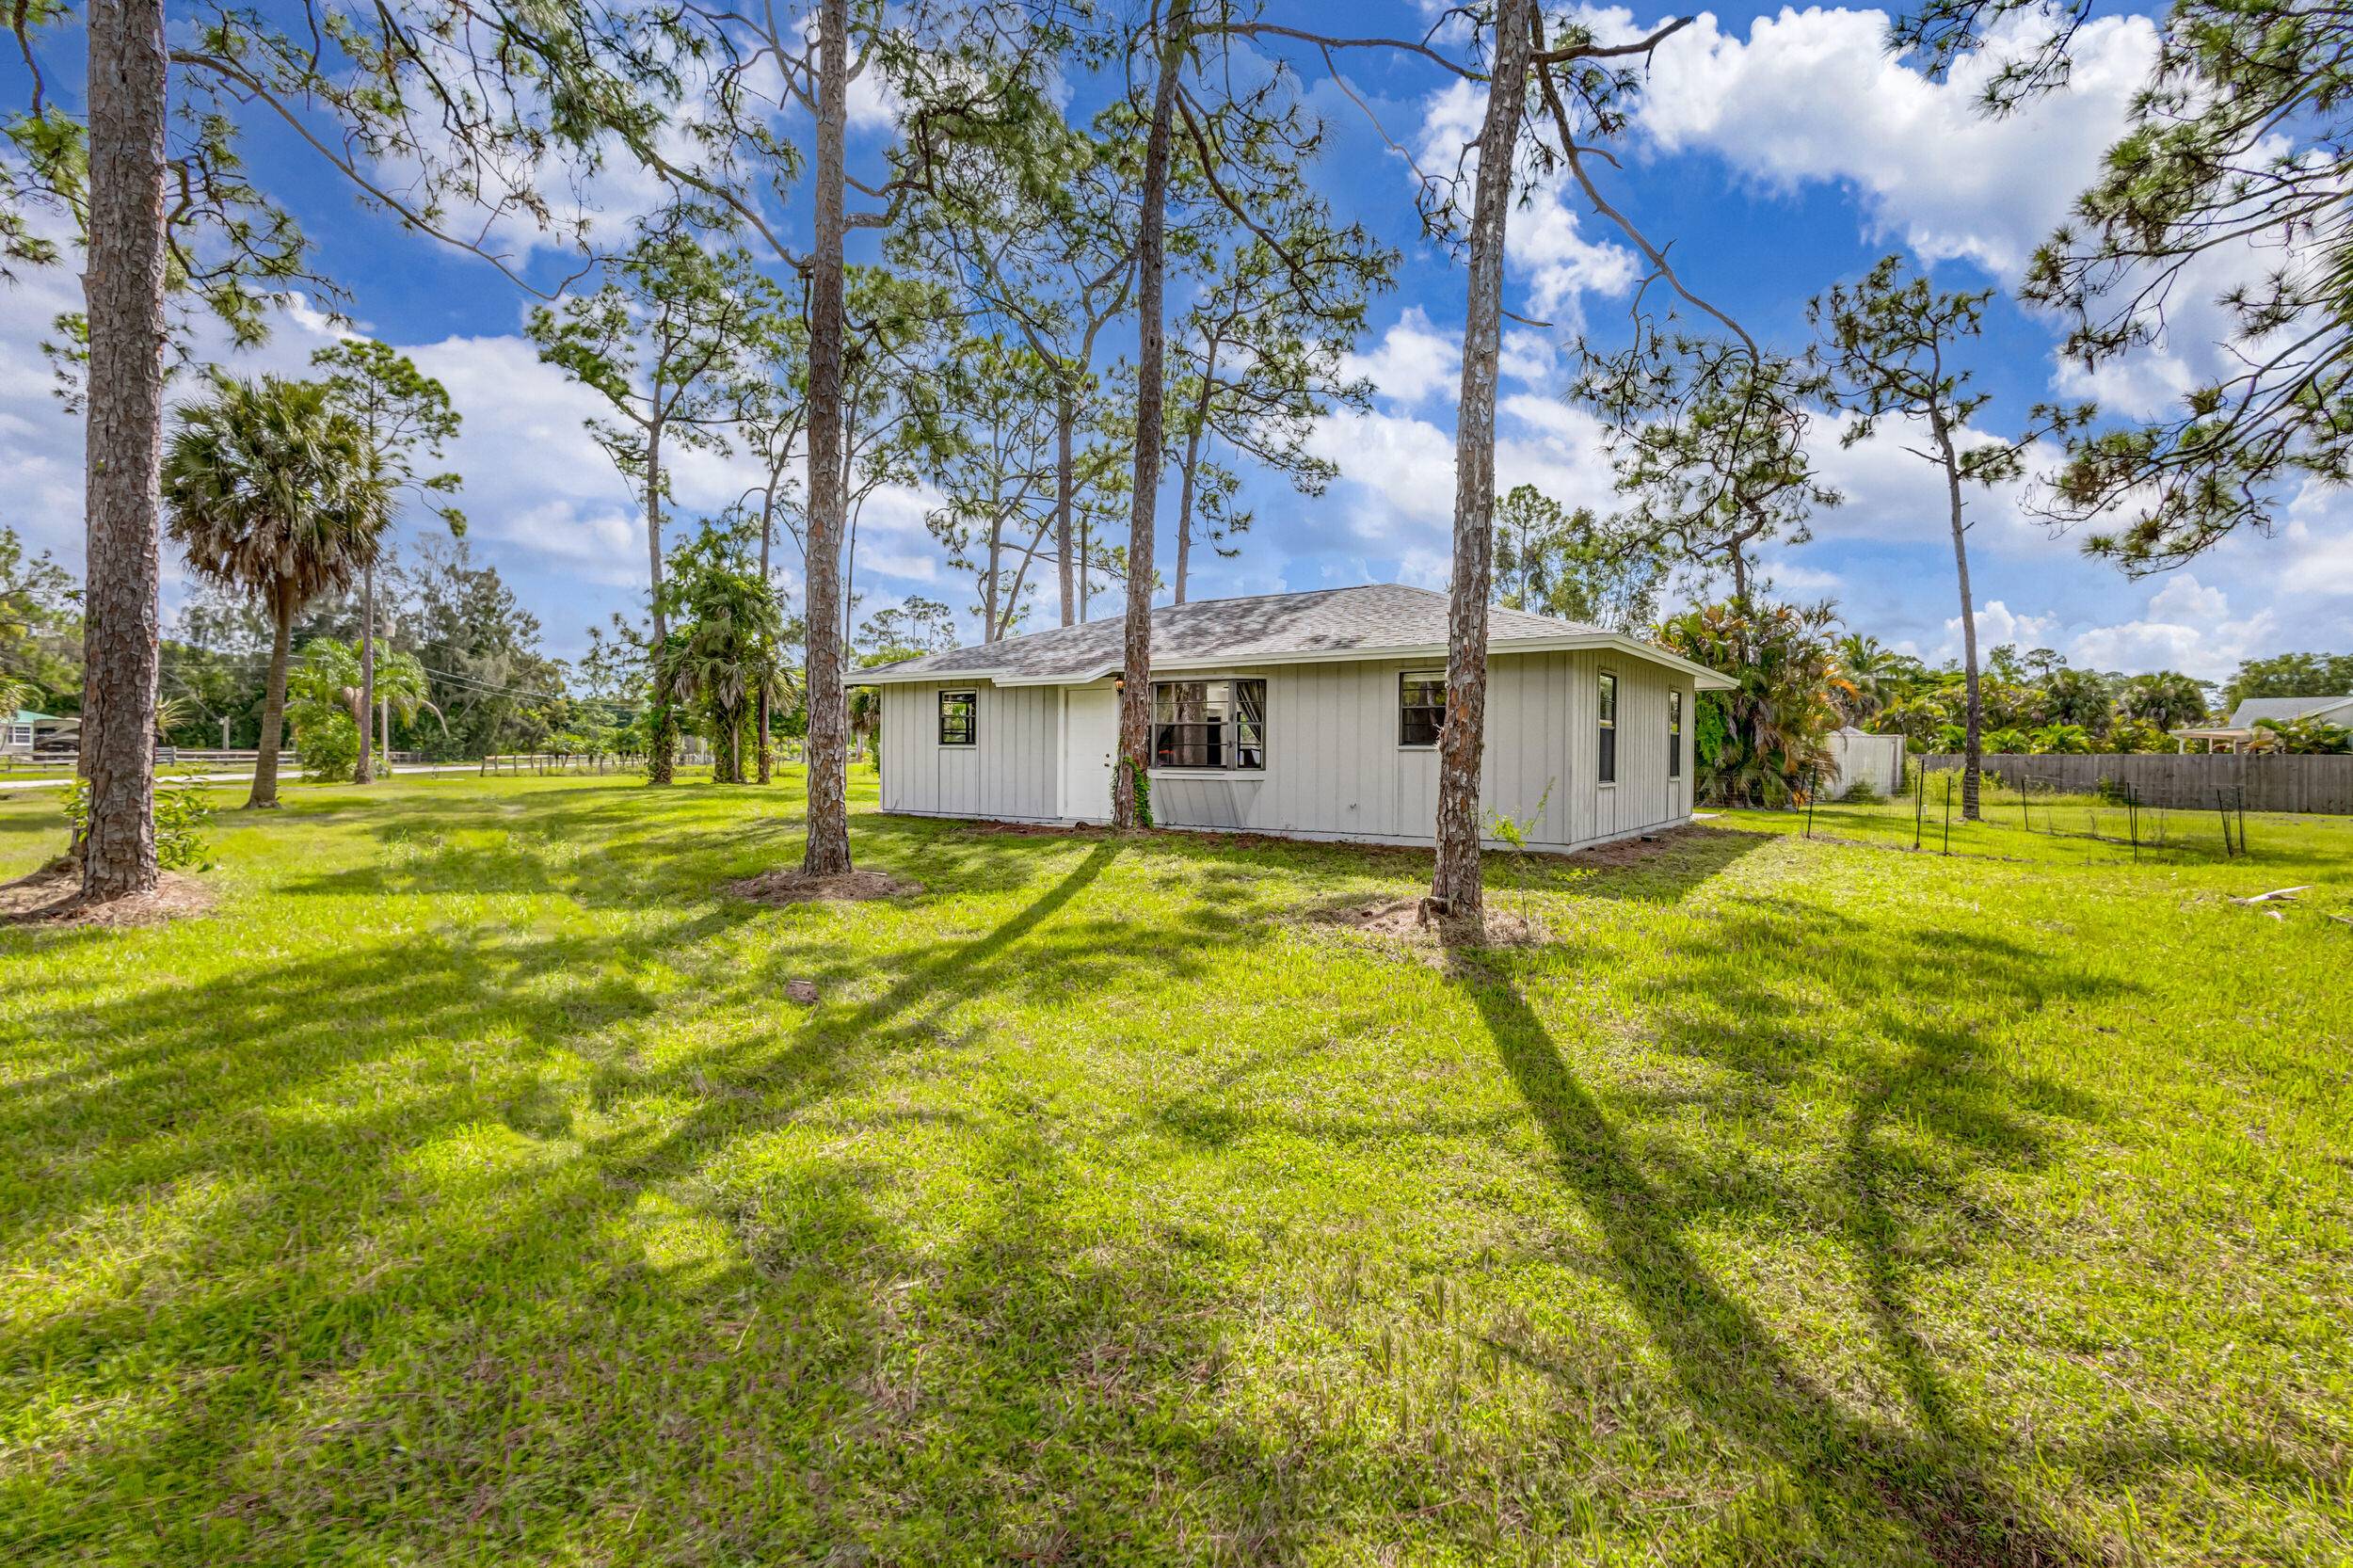 Experience the epitome of rural living in this charming 3 bedroom cabin style country residence.